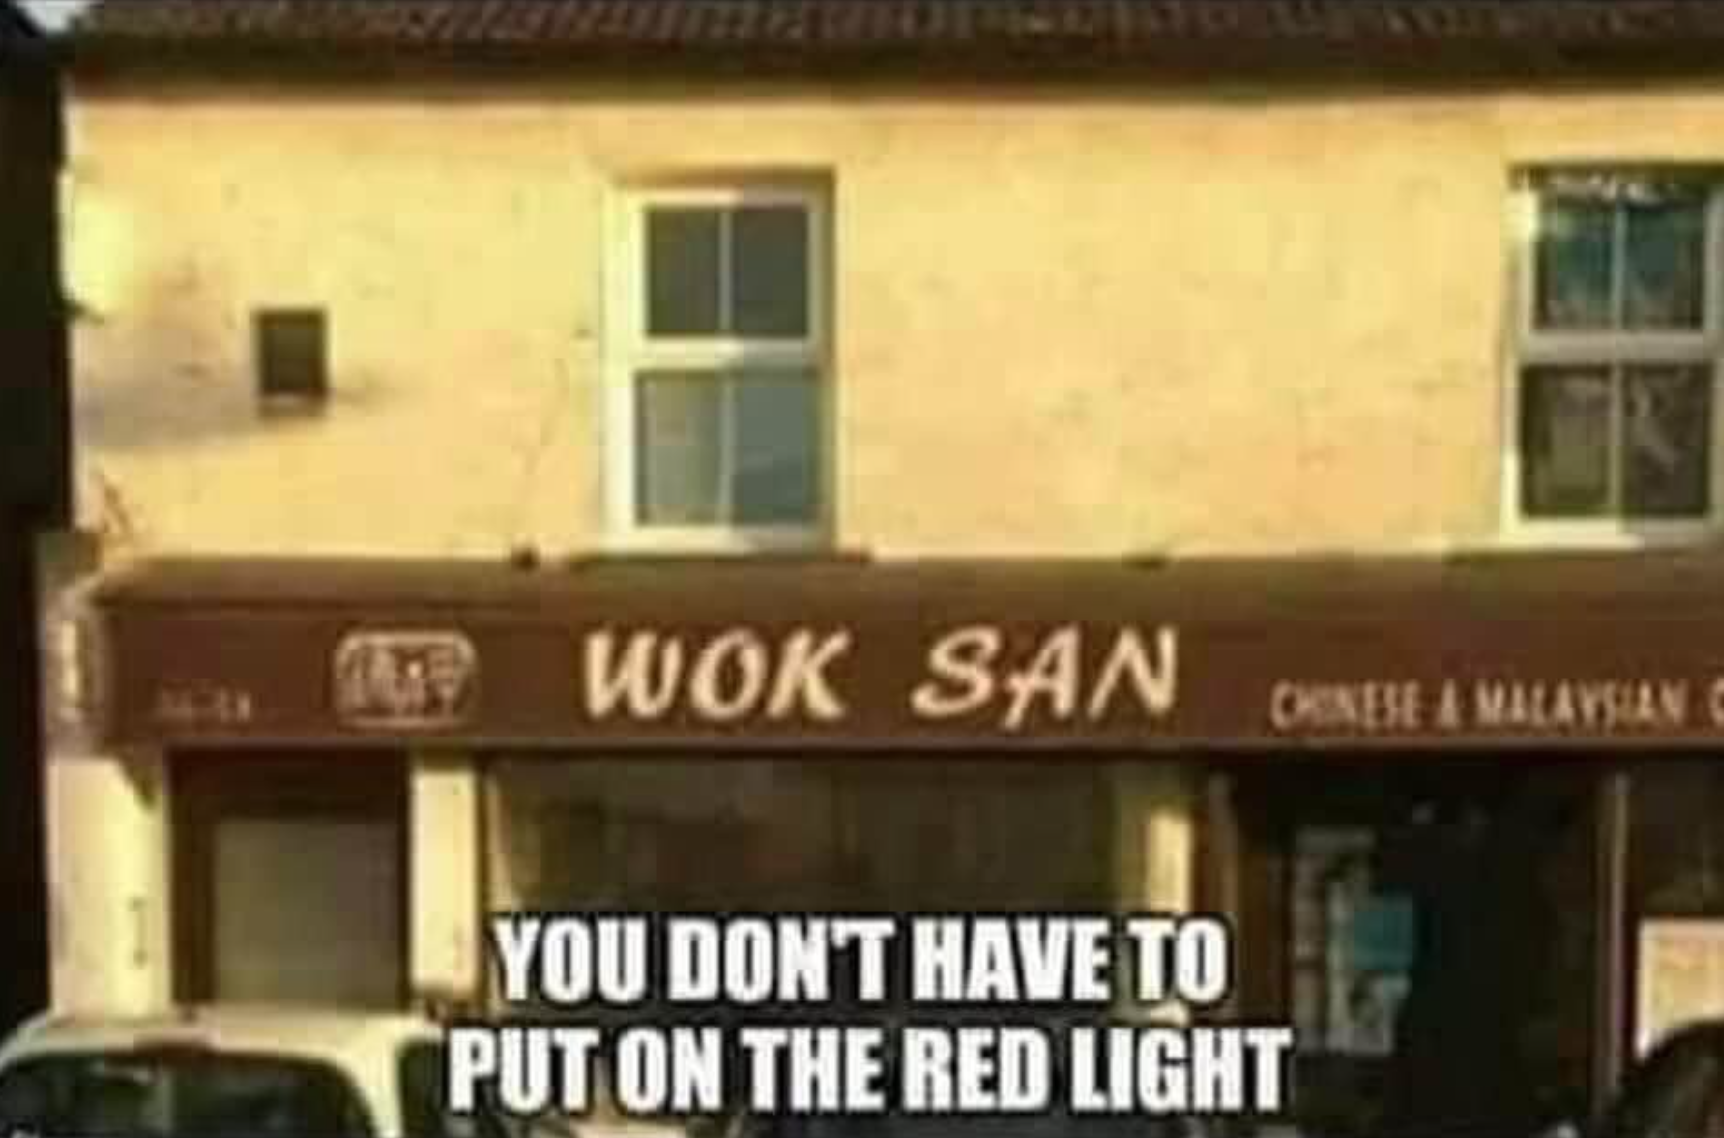 wok san you don t have to put on the red light - 1 Wok San Onee Malaysian You Don'T Have To Put On The Red Light